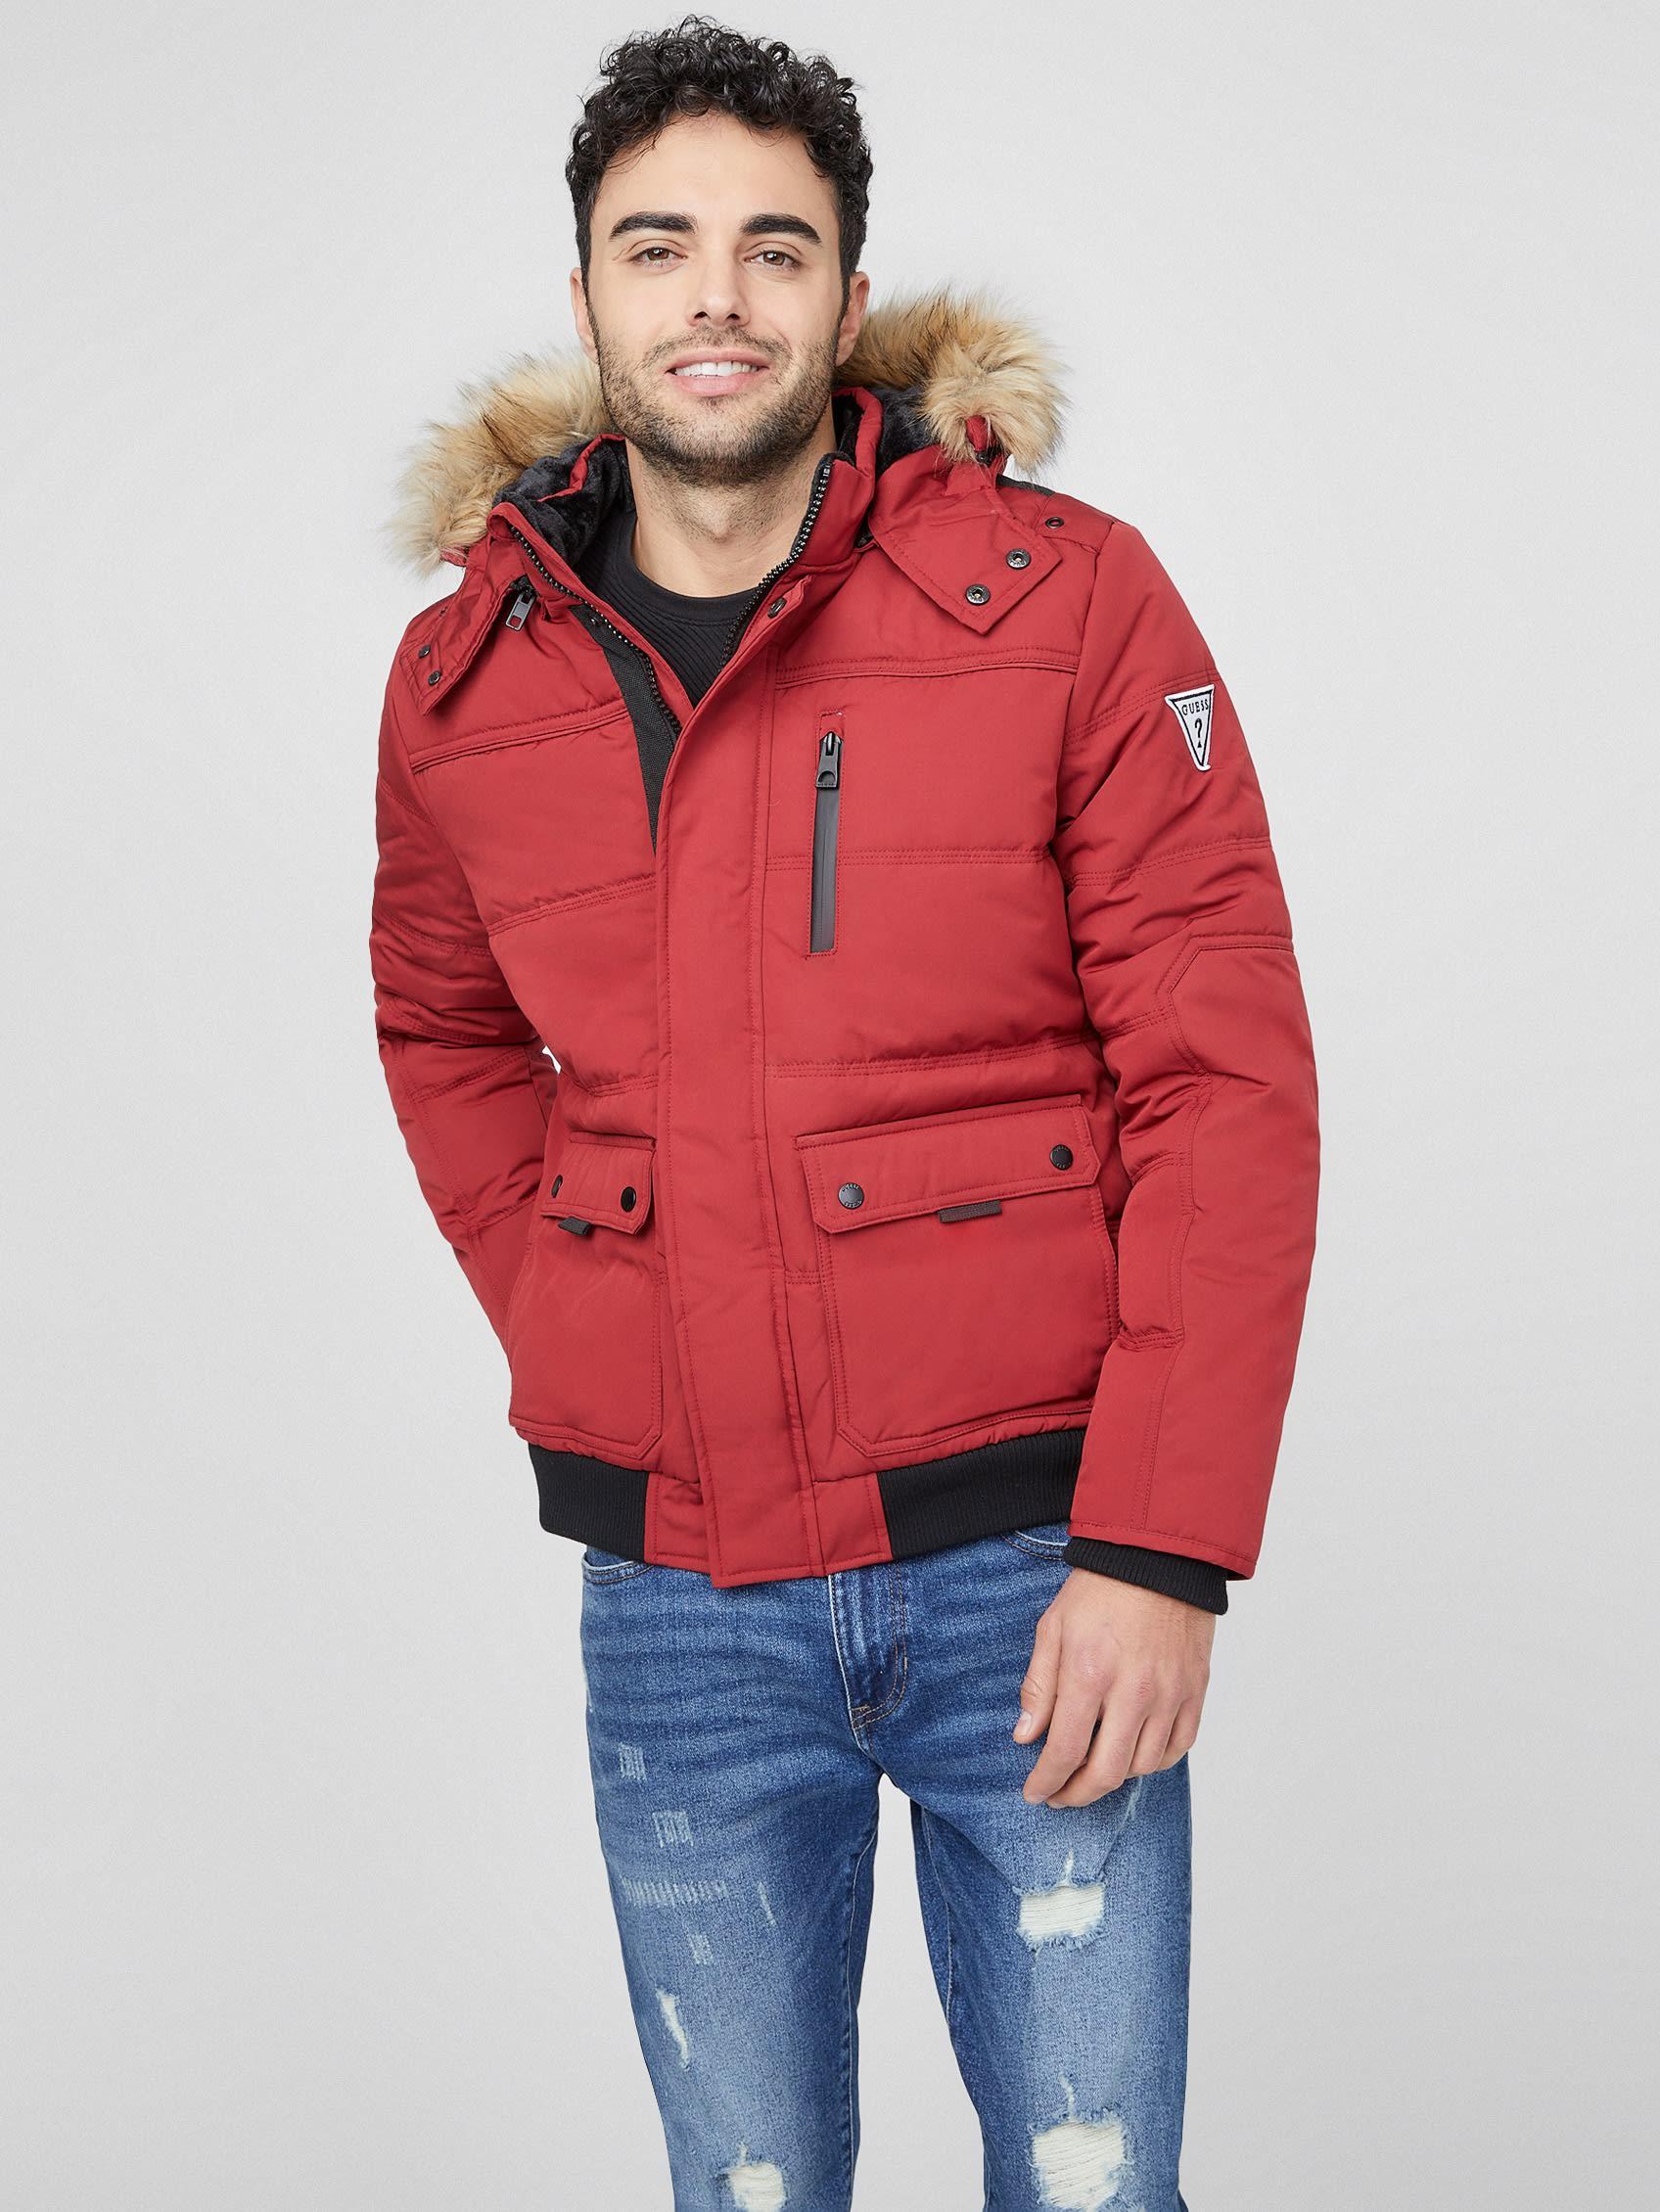 Guess Factory Duncan Jacket in Red for Men | Lyst